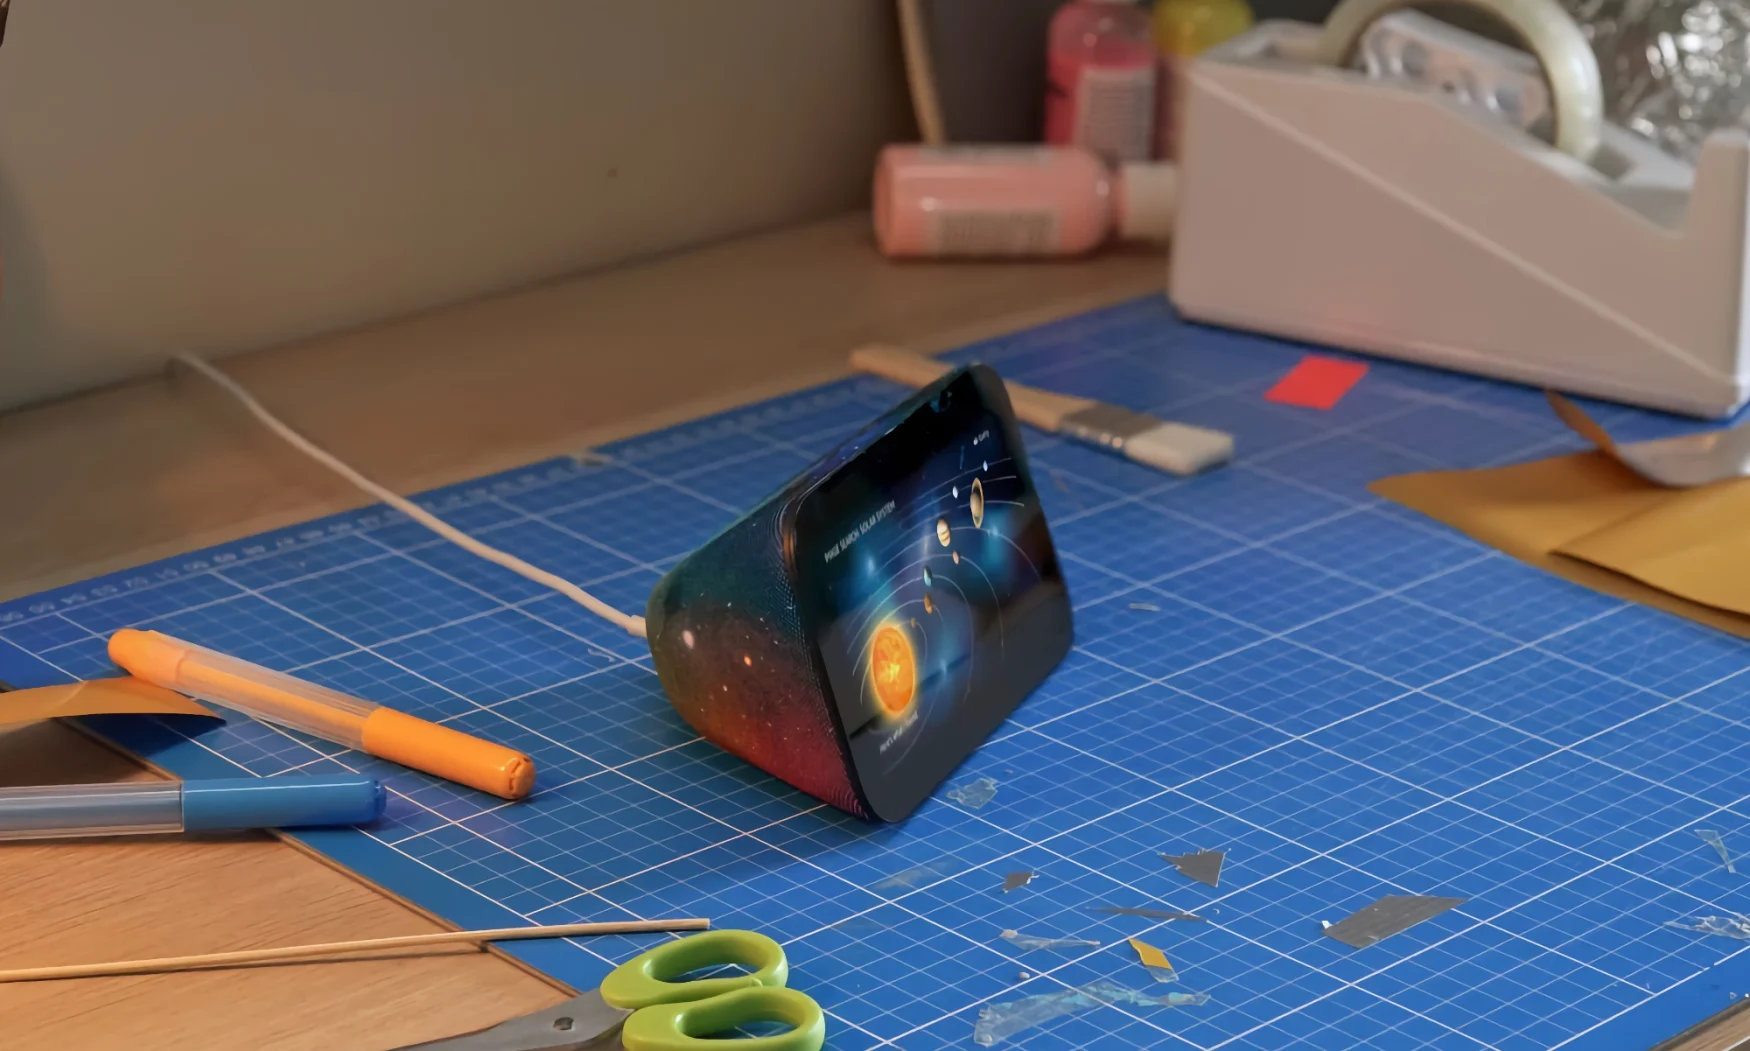 Amazon marketing photo of the Amazon Echo Show 5 Kids with a galaxy design on its back and an illustration of the solar system on its screen. It sits on a blue drafting mat on a desk with scissors, pens and other supplies nearby.